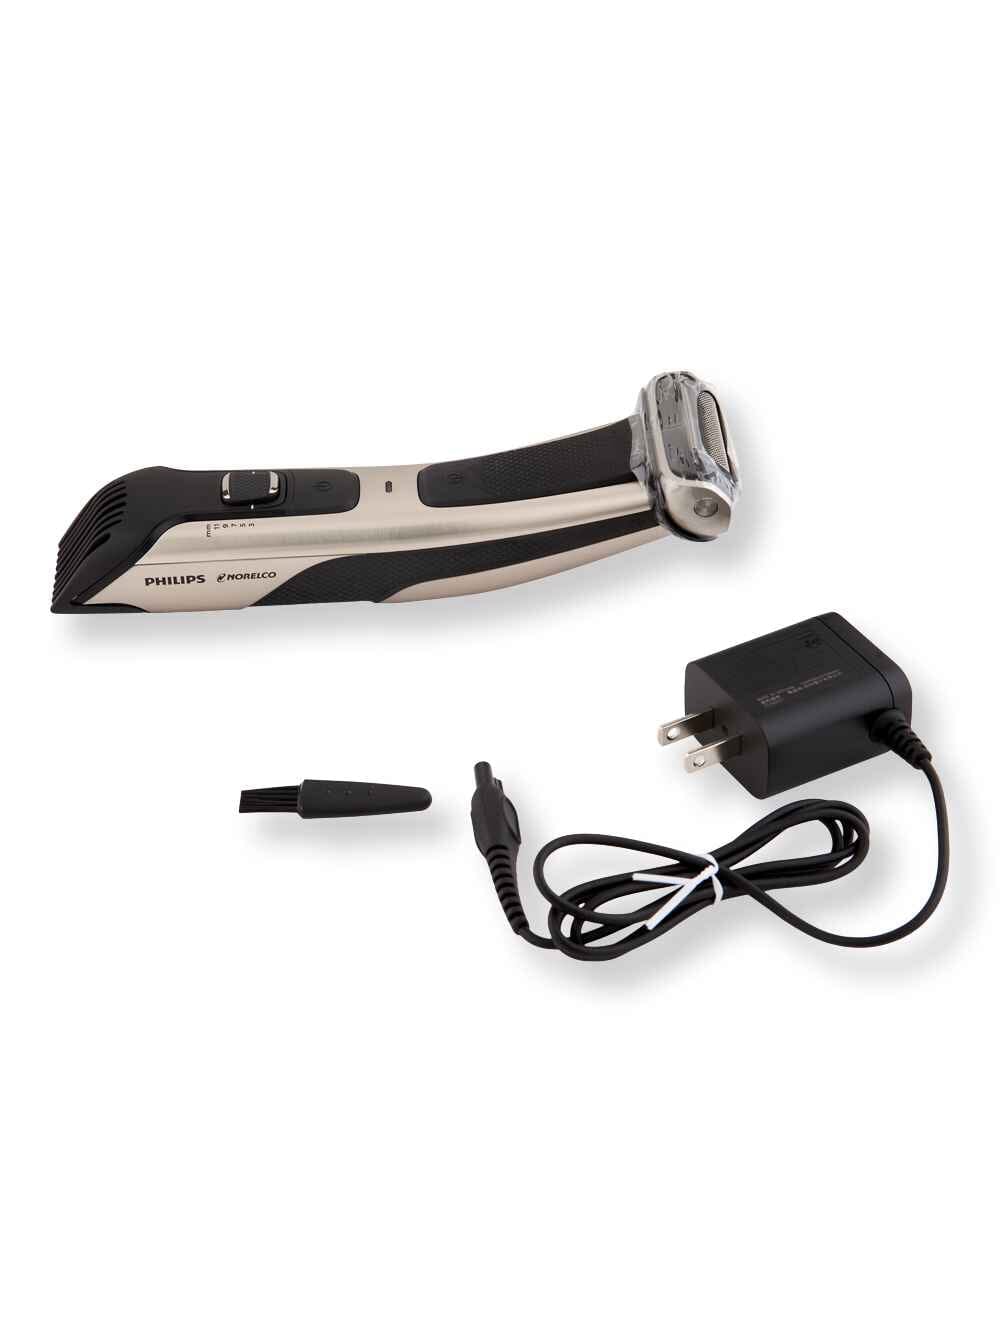 Philips Norelco Philips Norelco Bodygroom Series 7000 Body & Manscaping Trimmer & Shaver Razors, Blades, & Trimmers 